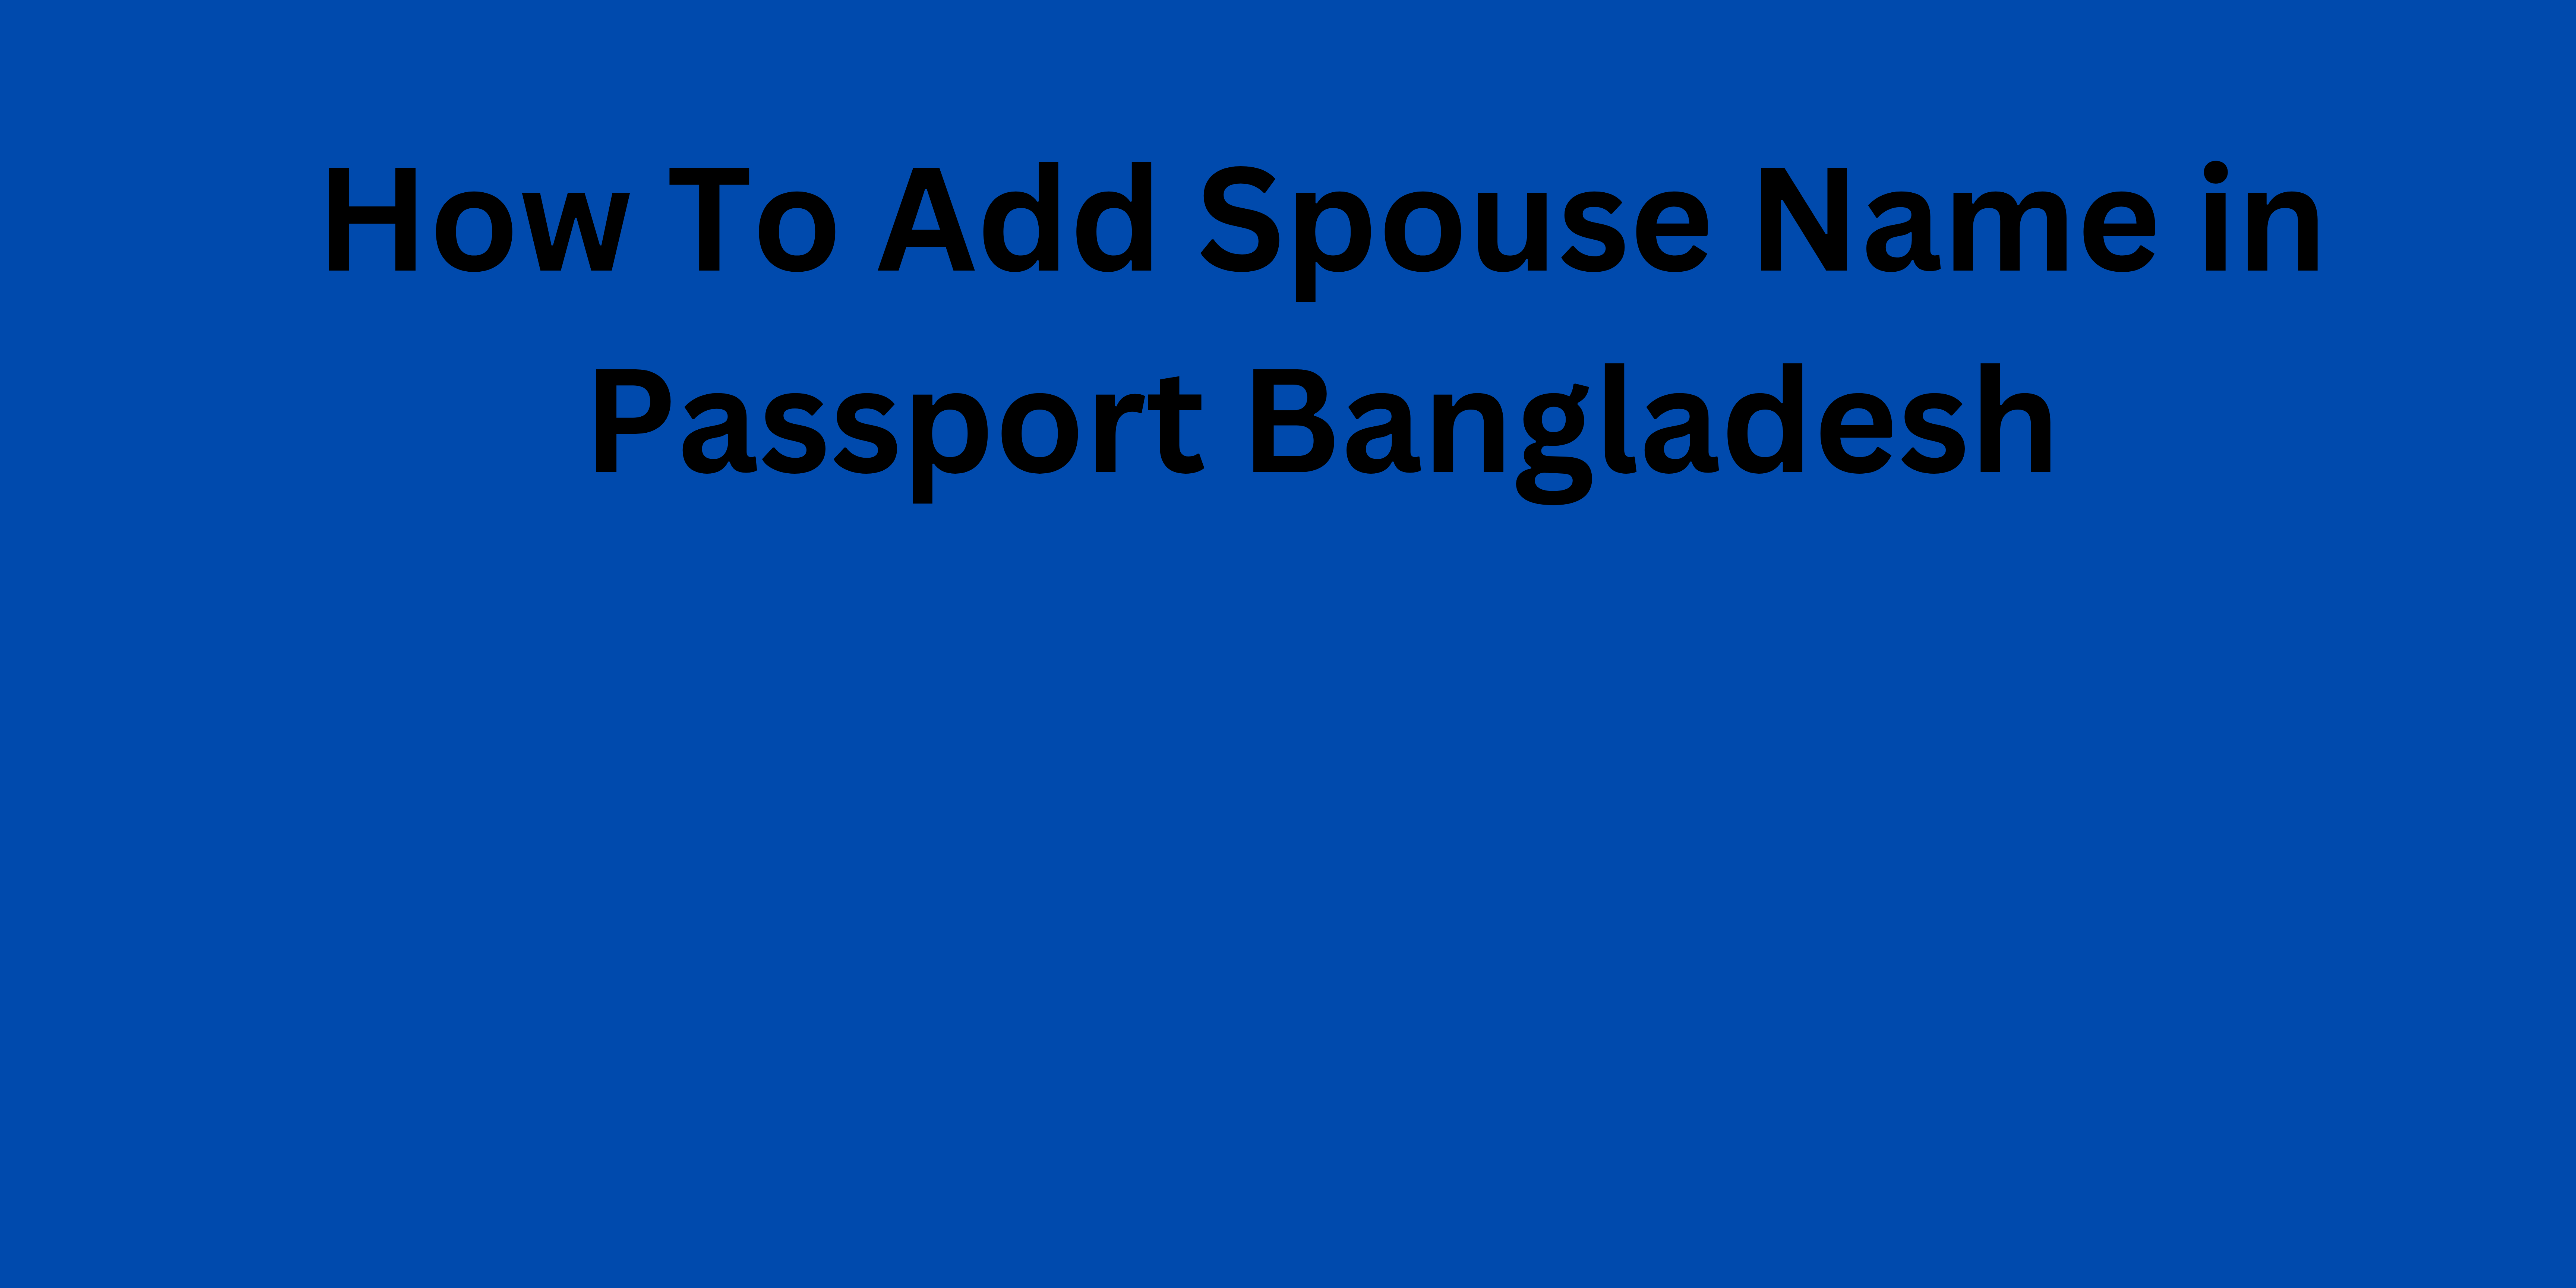 How To Add Spouse Name in Passport Bangladesh